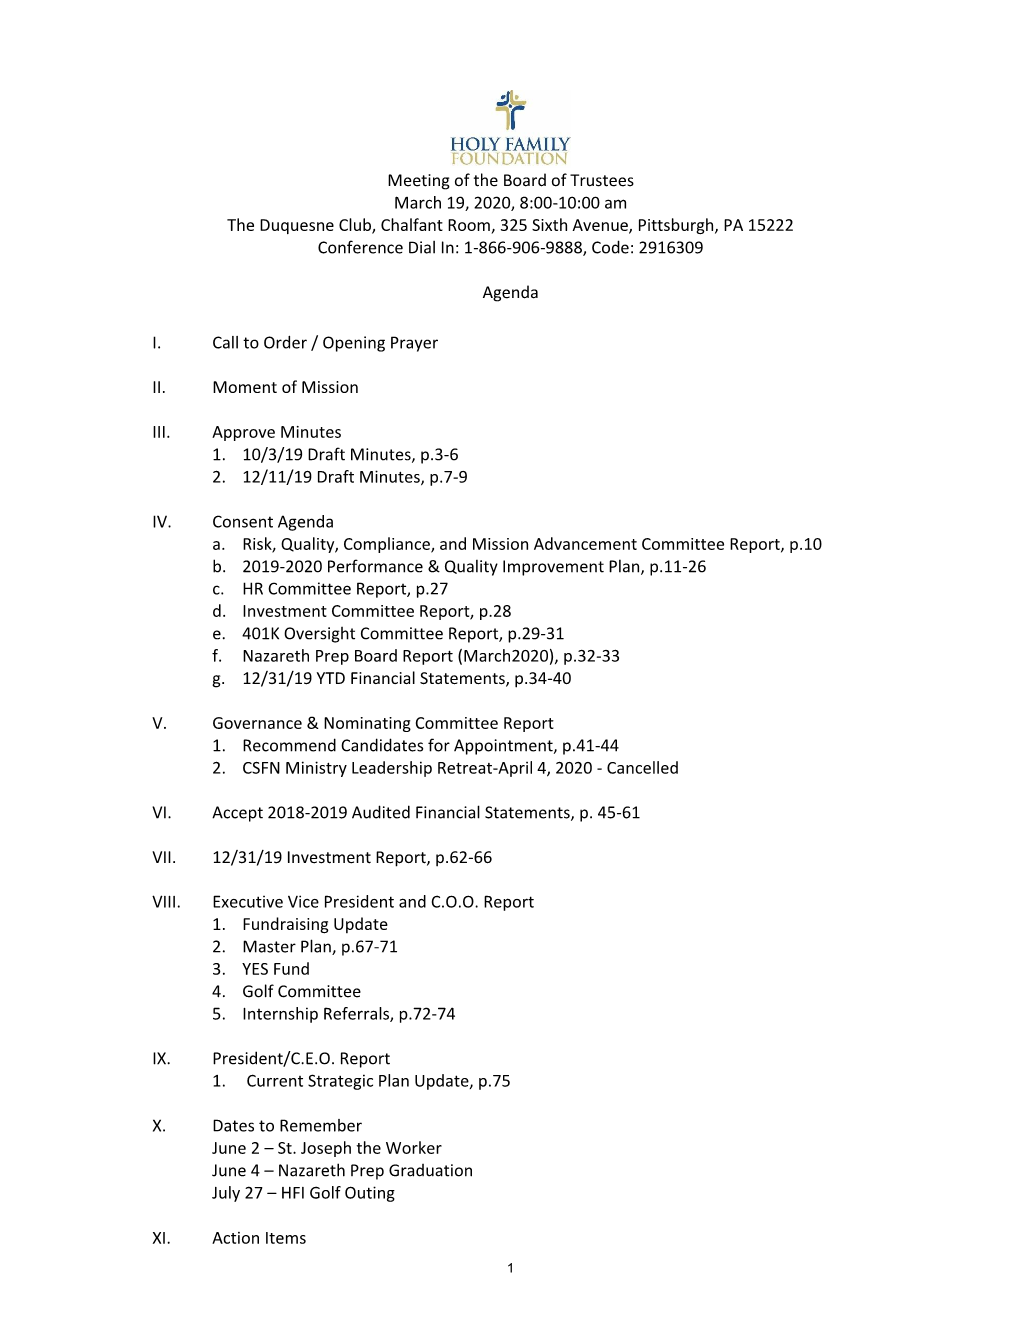 Meeting of the Board of Trustees March 19, 2020, 8:00-10:00 Am The